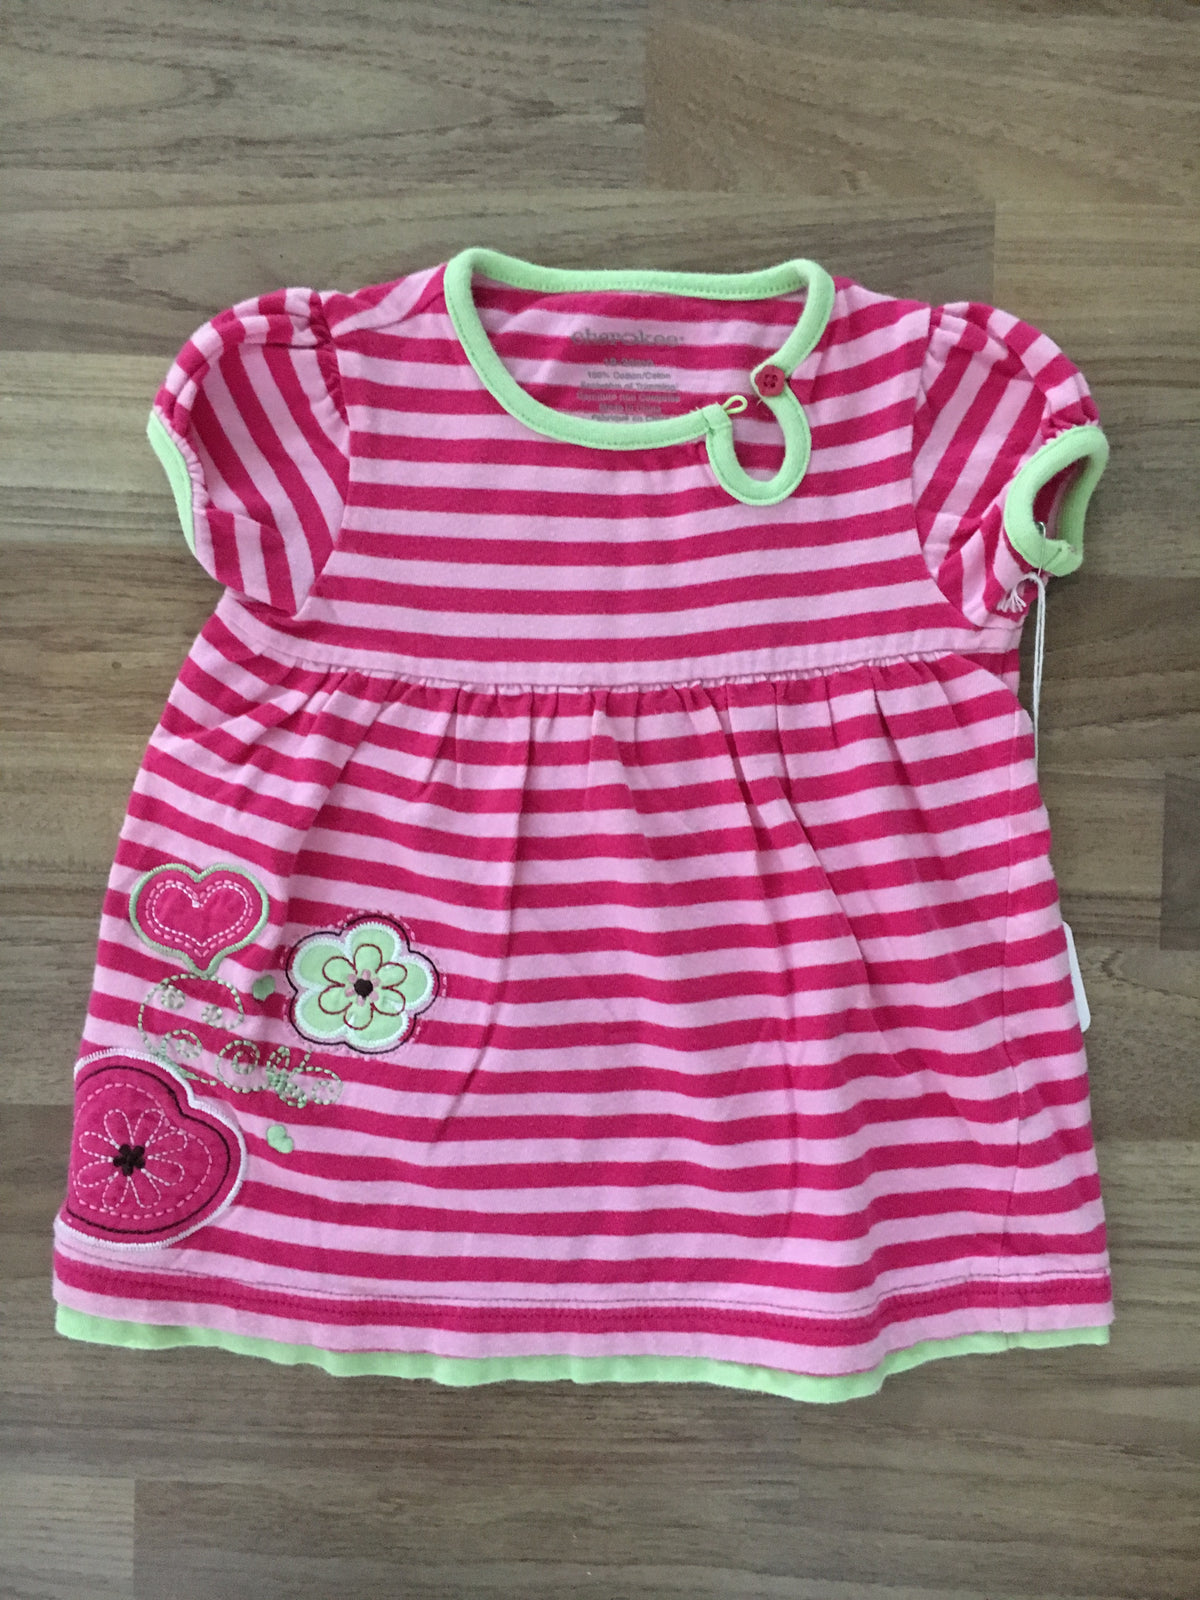 Short Sleeve Striped Top (Girls Size 18-24M)